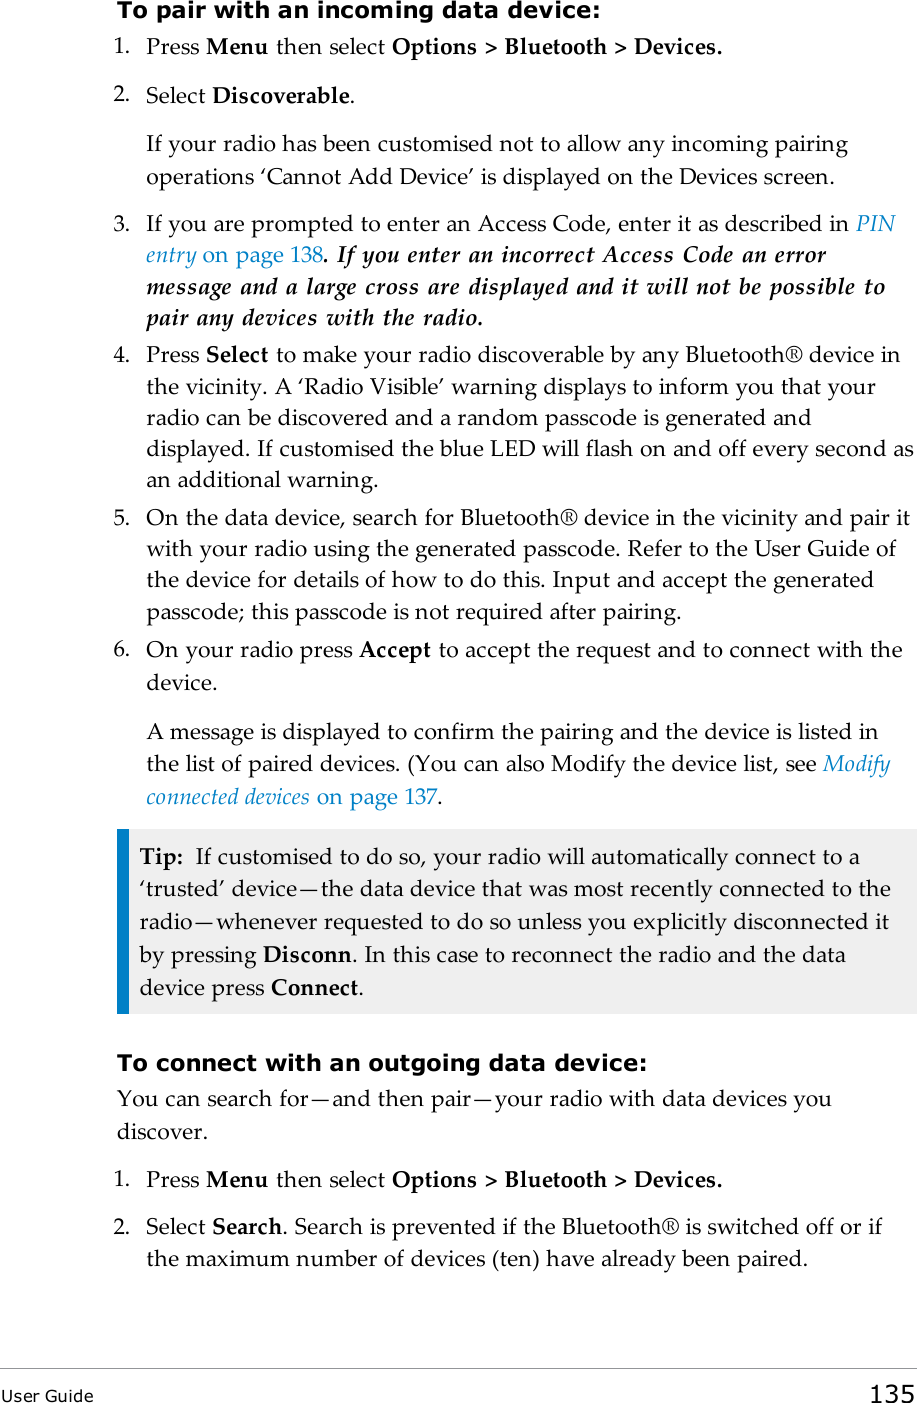 To pair with an incoming data device:1. Press Menu then select Options &gt; Bluetooth &gt; Devices.2. Select Discoverable.If your radio has been customised not to allow any incoming pairingoperations ‘Cannot Add Device’ is displayed on the Devices screen.3. If you are prompted to enter an Access Code, enter it as described in PINentry on page138. If you enter an incorrect Access Code an errormessage and a large cross are displayed and it will not be possible topair any devices with the radio.4. Press Select to make your radio discoverable by any Bluetooth® device inthe vicinity. A ‘Radio Visible’ warning displays to inform you that yourradio can be discovered and a random passcode is generated anddisplayed. If customised the blue LED will flash on and off every second asan additional warning.5. On the data device, search for Bluetooth® device in the vicinity and pair itwith your radio using the generated passcode. Refer to the User Guide ofthe device for details of how to do this. Input and accept the generatedpasscode; this passcode is not required after pairing.6. On your radio press Accept to accept the request and to connect with thedevice.A message is displayed to confirm the pairing and the device is listed inthe list of paired devices. (You can also Modify the device list, see Modifyconnected devices on page137.Tip: If customised to do so, your radio will automatically connect to a‘trusted’ device—the data device that was most recently connected to theradio—whenever requested to do so unless you explicitly disconnected itby pressing Disconn. In this case to reconnect the radio and the datadevice press Connect.To connect with an outgoing data device:You can search for—and then pair—your radio with data devices youdiscover.1. Press Menu then select Options &gt; Bluetooth &gt; Devices.2. Select Search.Search is prevented if the Bluetooth® is switched off or ifthe maximum number of devices (ten) have already been paired.User Guide 135